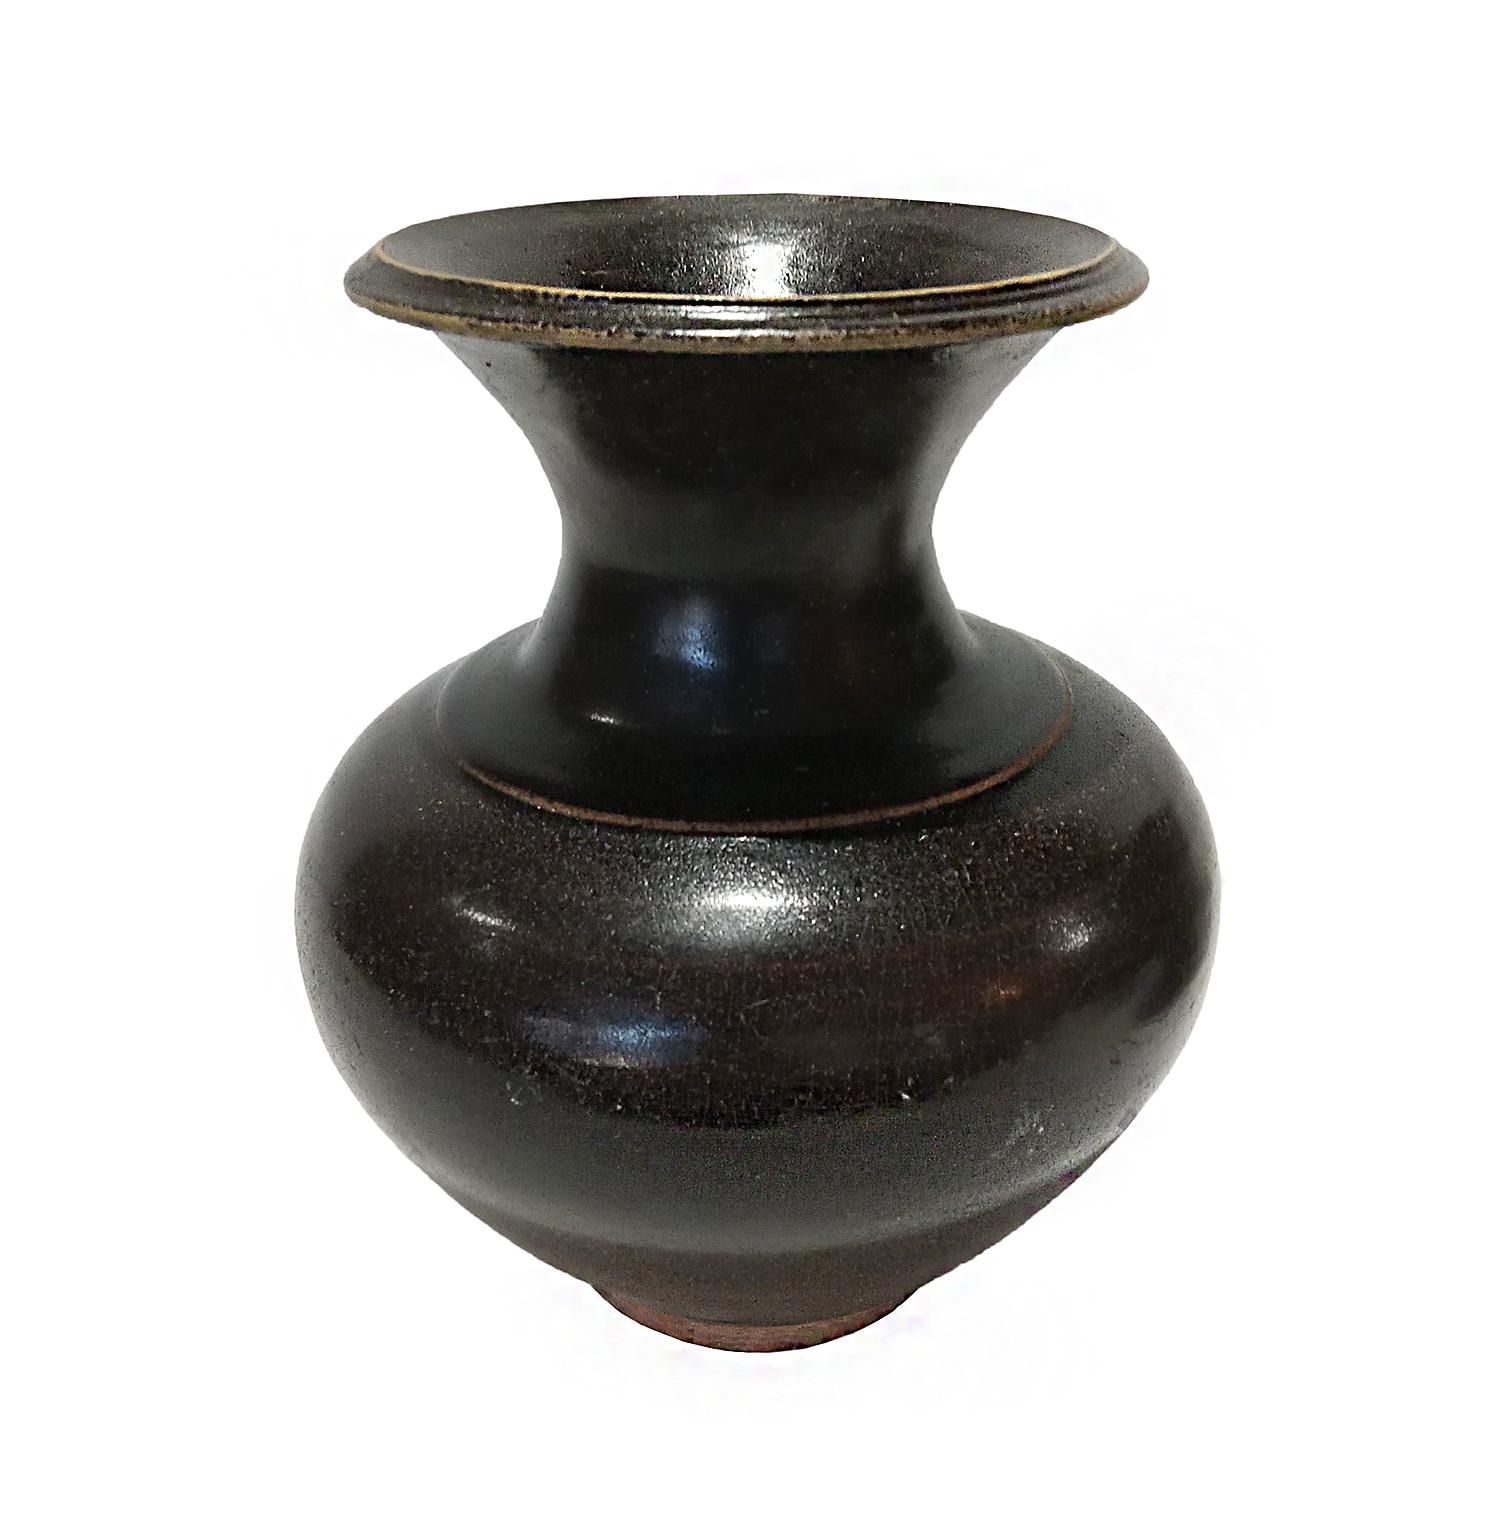 A Thai ceramic vase, glazed in black, early 20th Century. 

Narrow neck with a wide top, curved round body and narrow base. The black / dark brown glaze has a crackled celadon-style finish. 

7 inches in diameter, 8.5 inches high. 